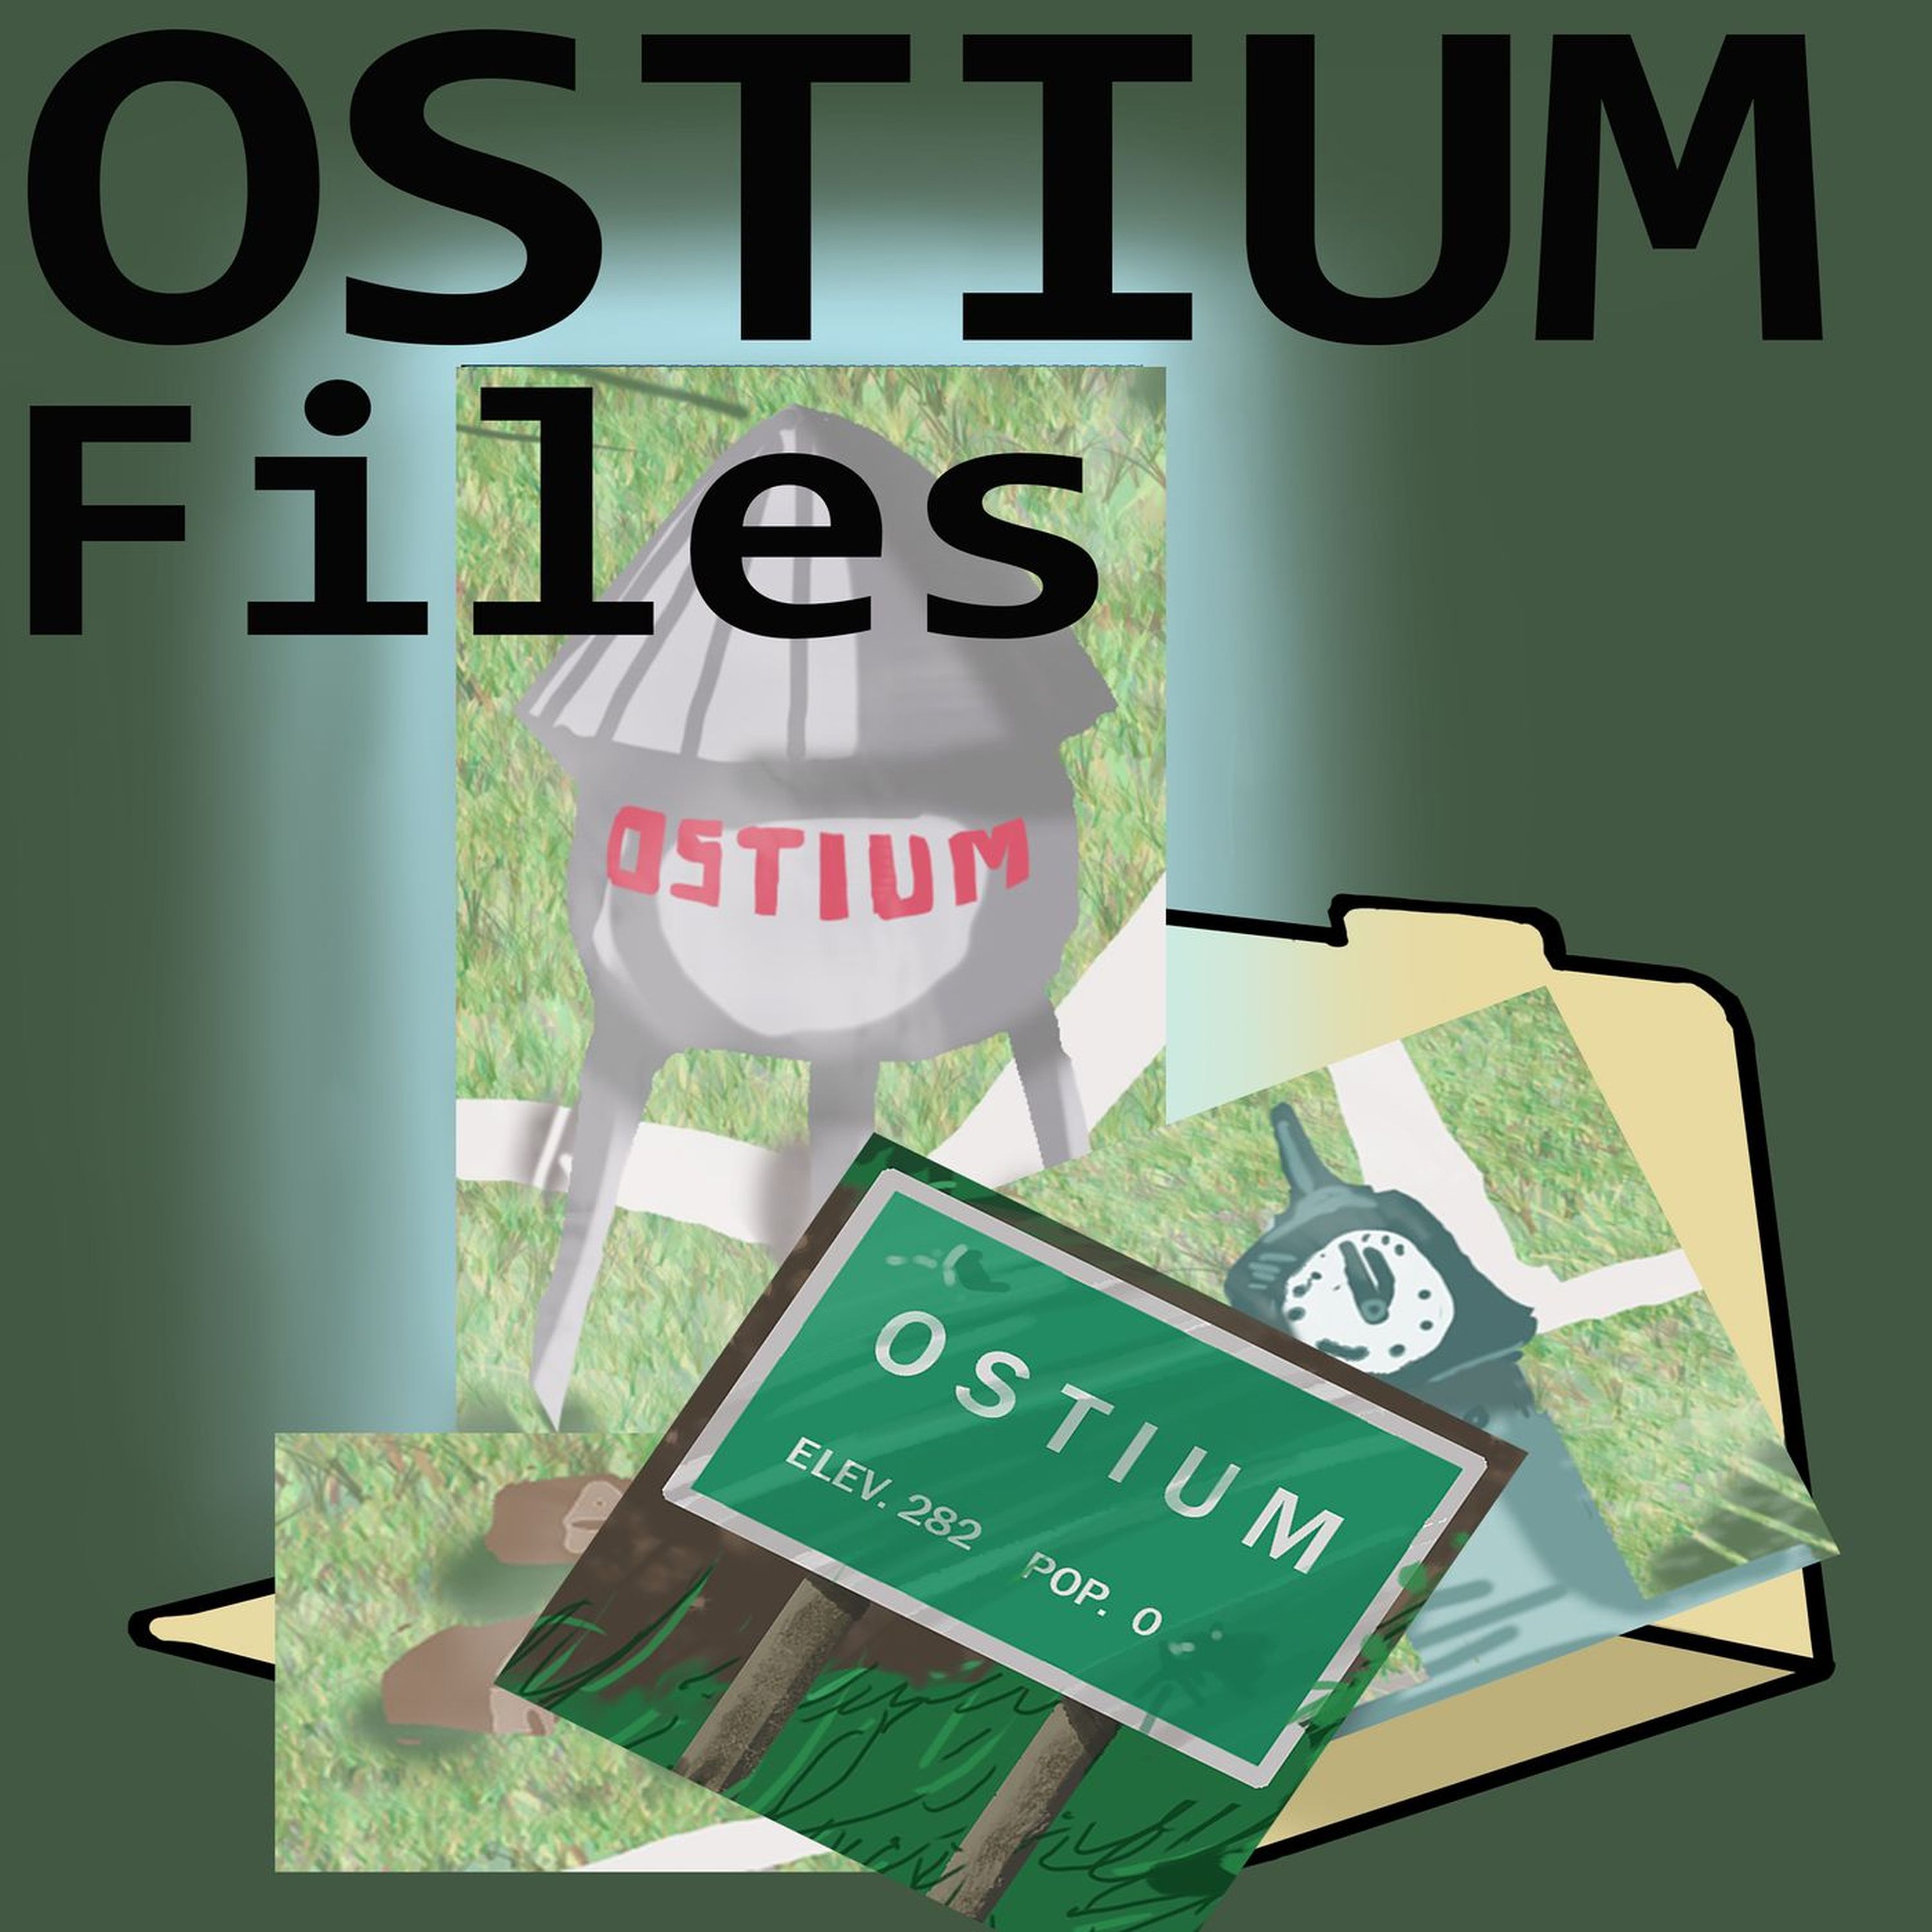 Ostium Hit Half a Million Downloads So Here’s a Special Ostium File For You!